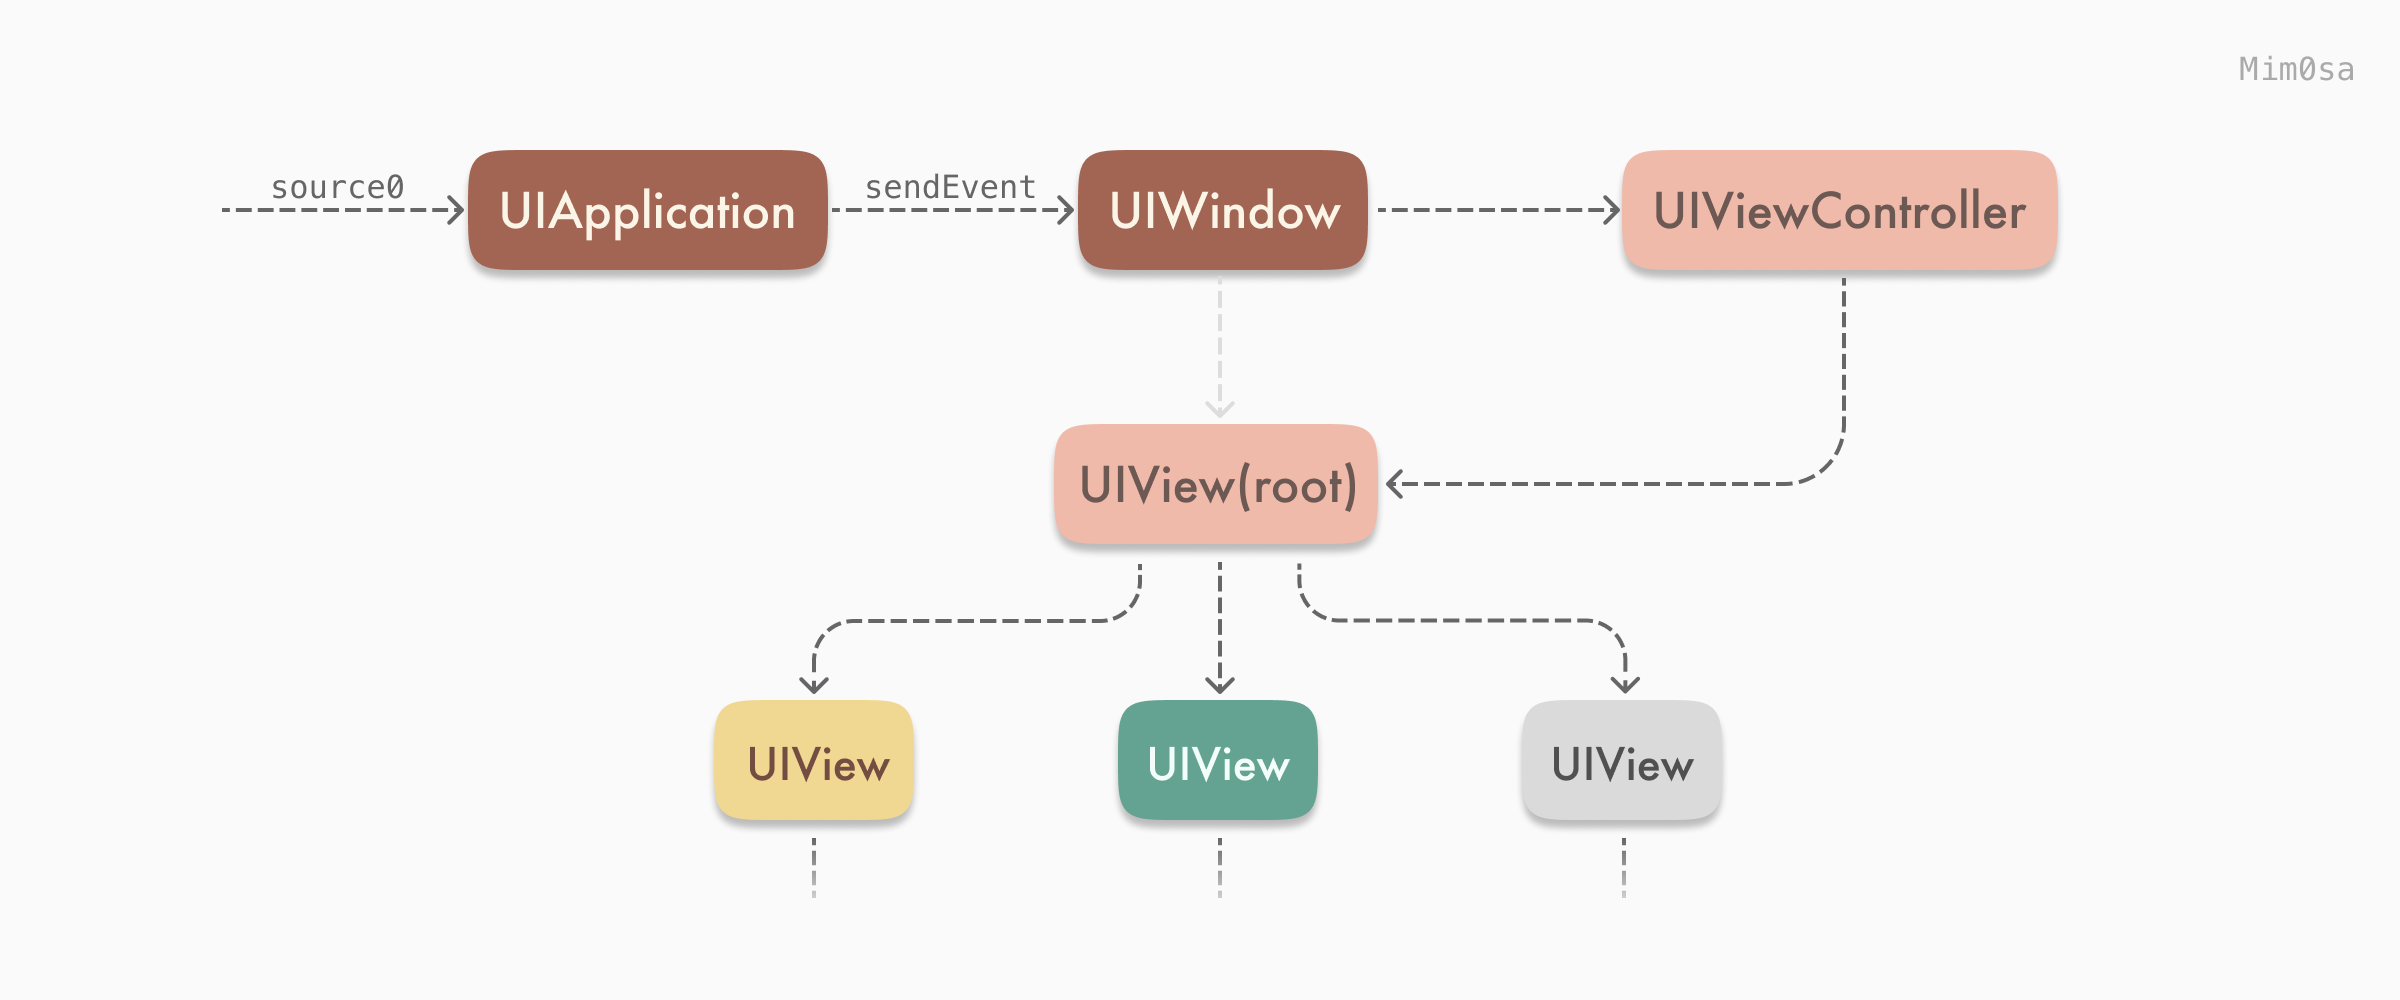 UIApplication to rootView